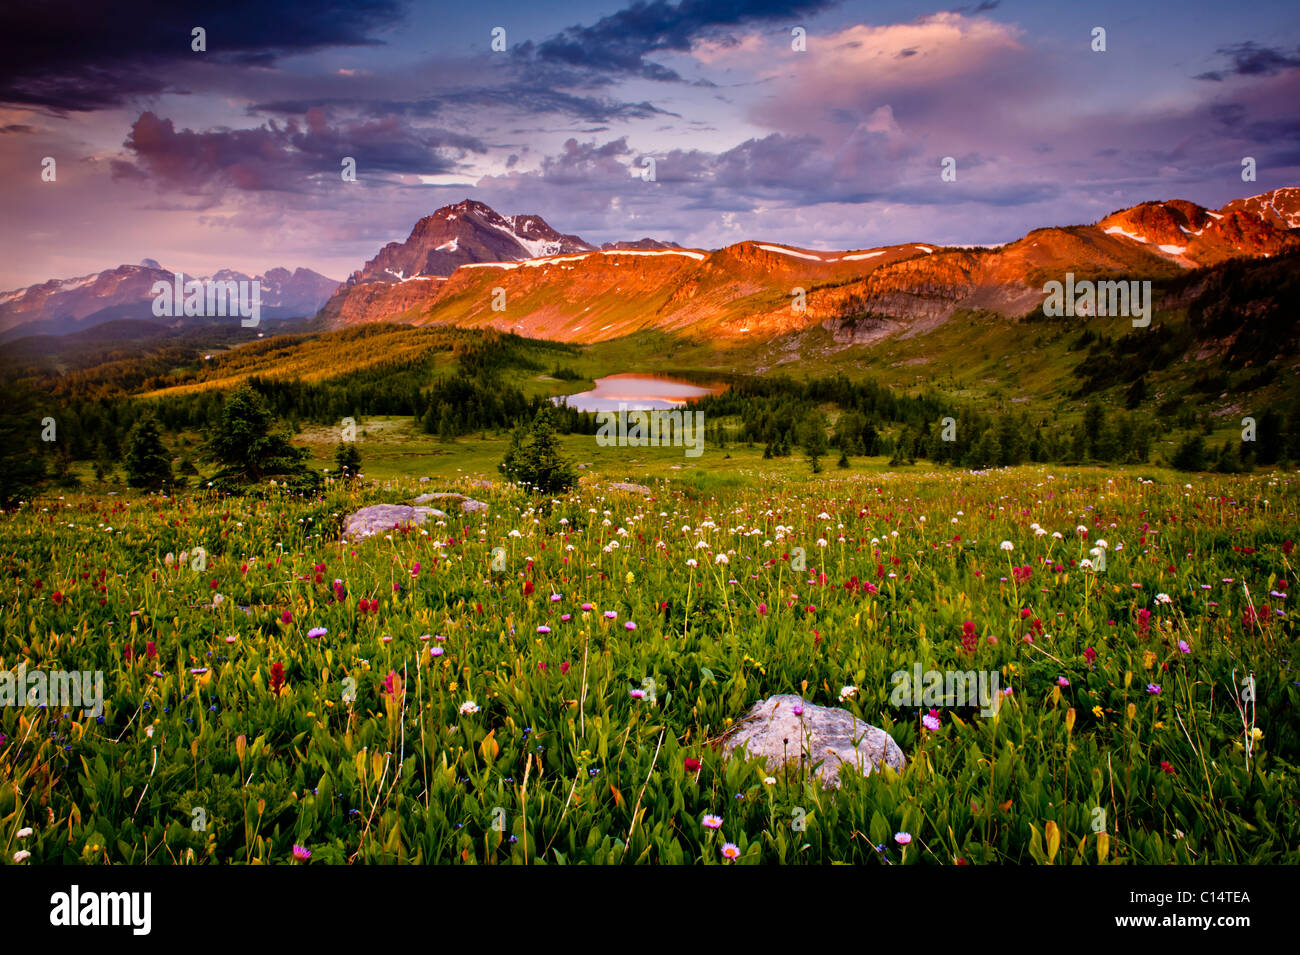 Field of wild flowers and mountain valley.  Banff National Park, Canada. Stock Photo